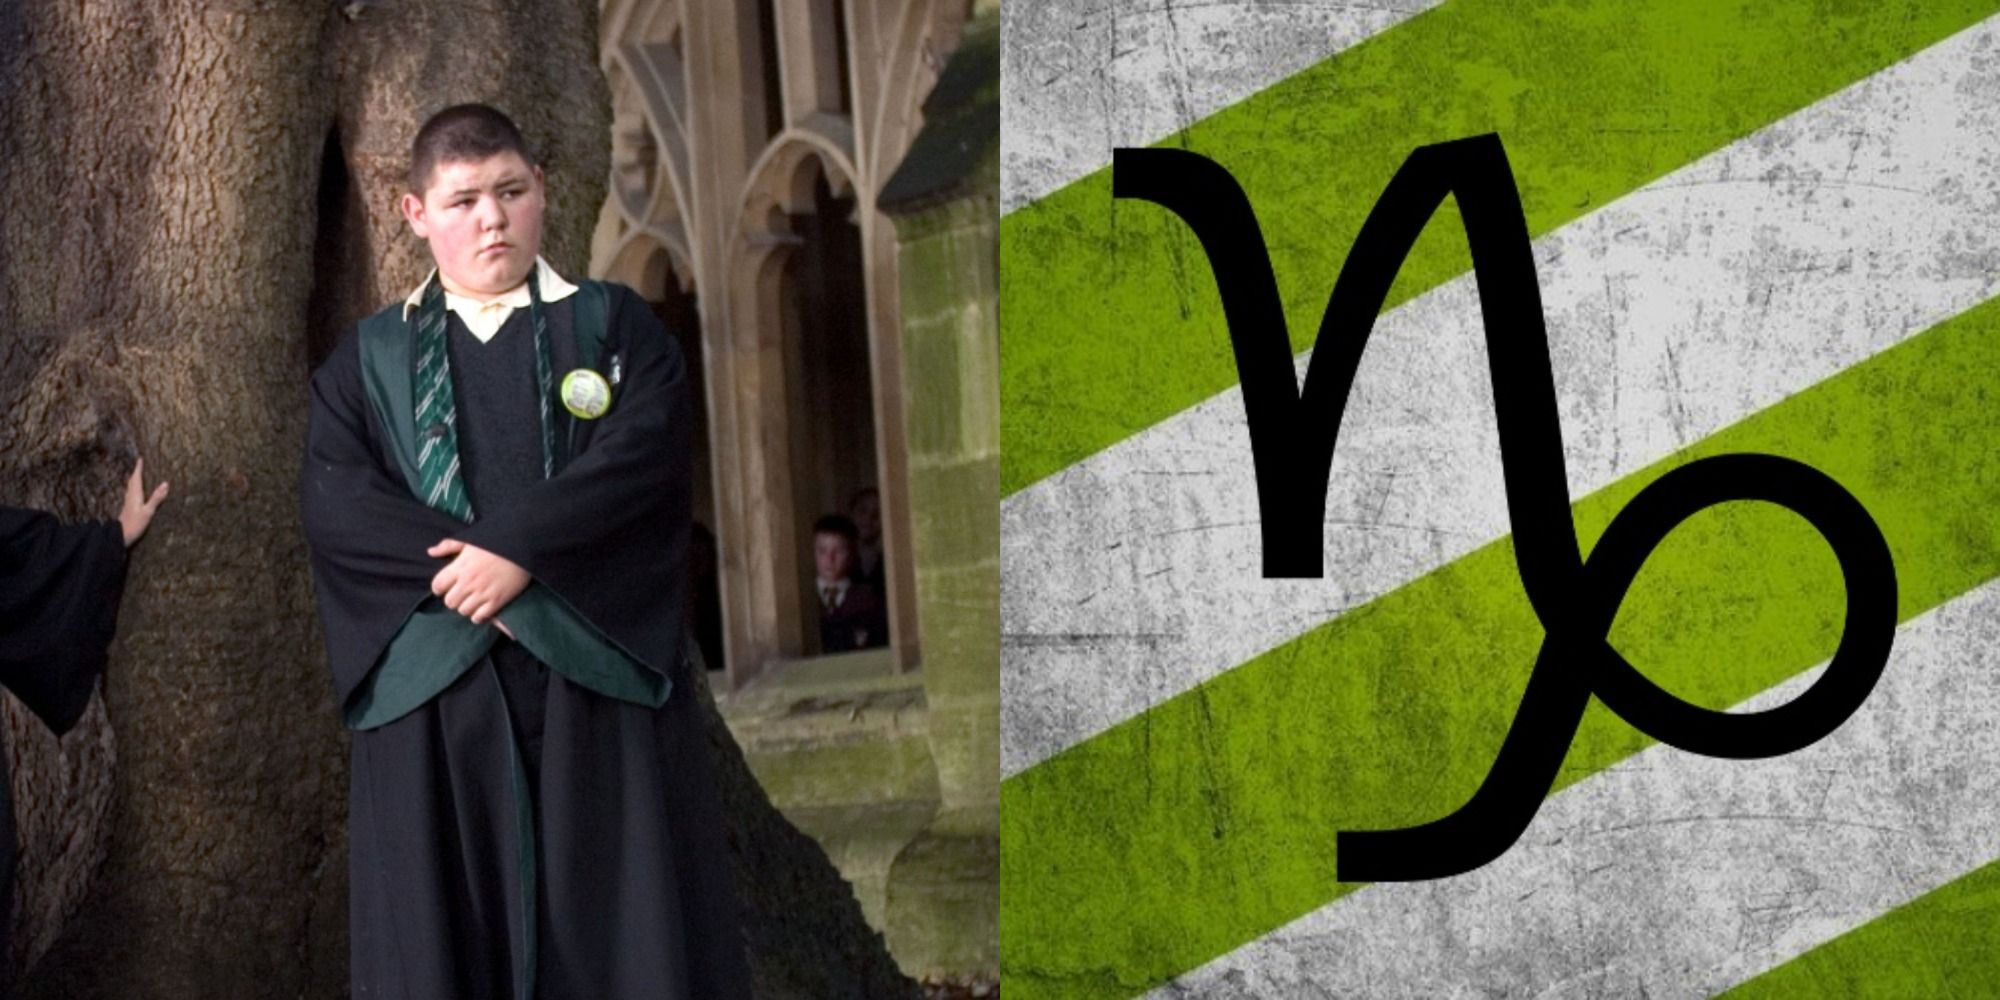 Vincent Crabbe in a Slytherin robe next to the Capricorn symbol over white and green stripes